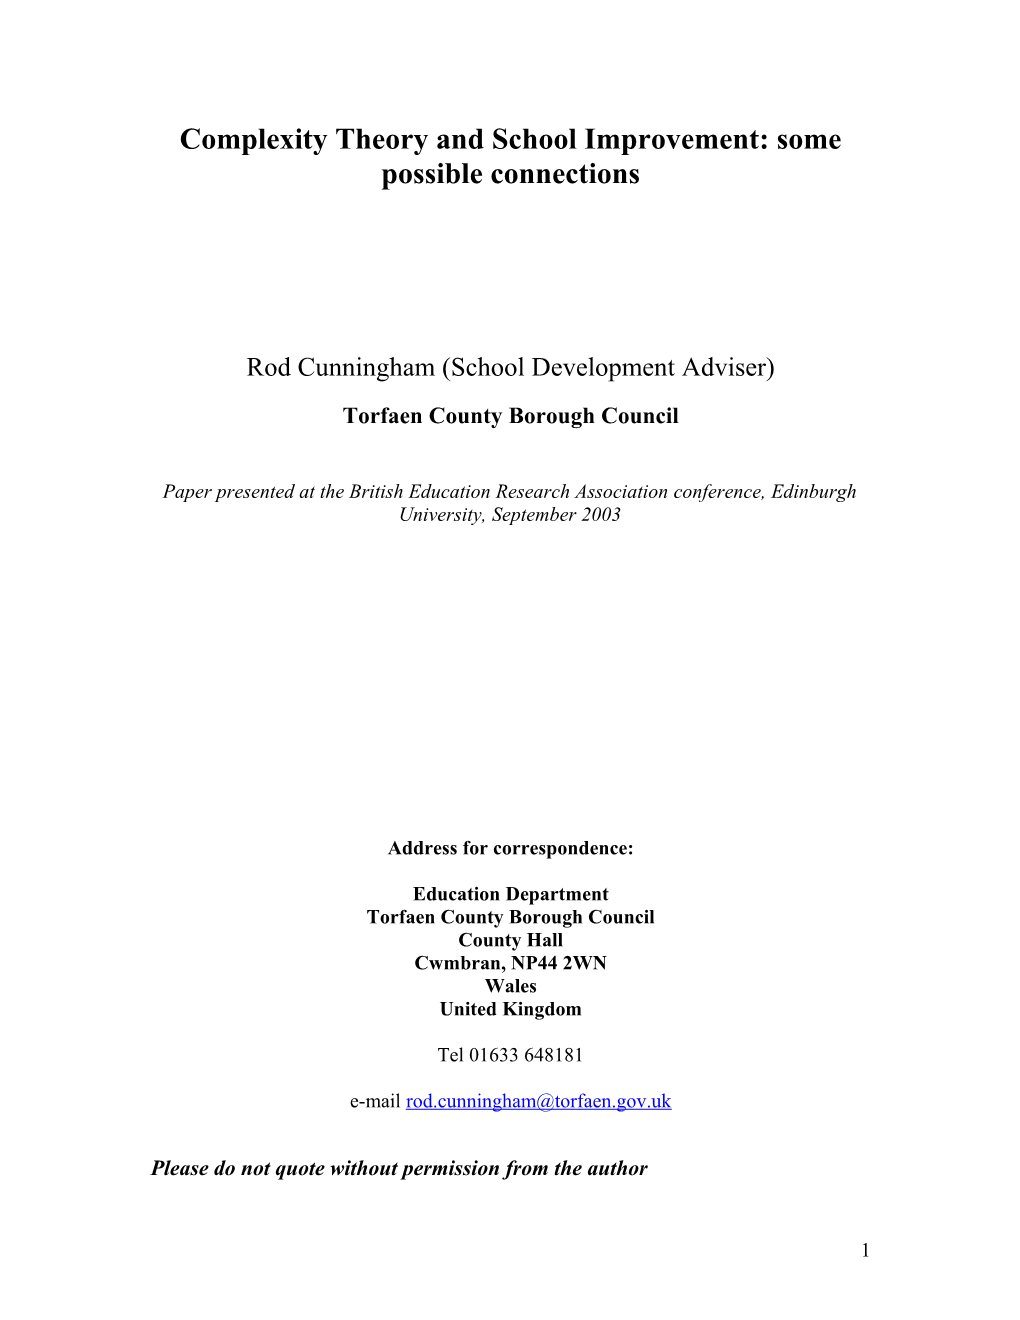 Complexity Theory and School Improvement: Some Possible Connections